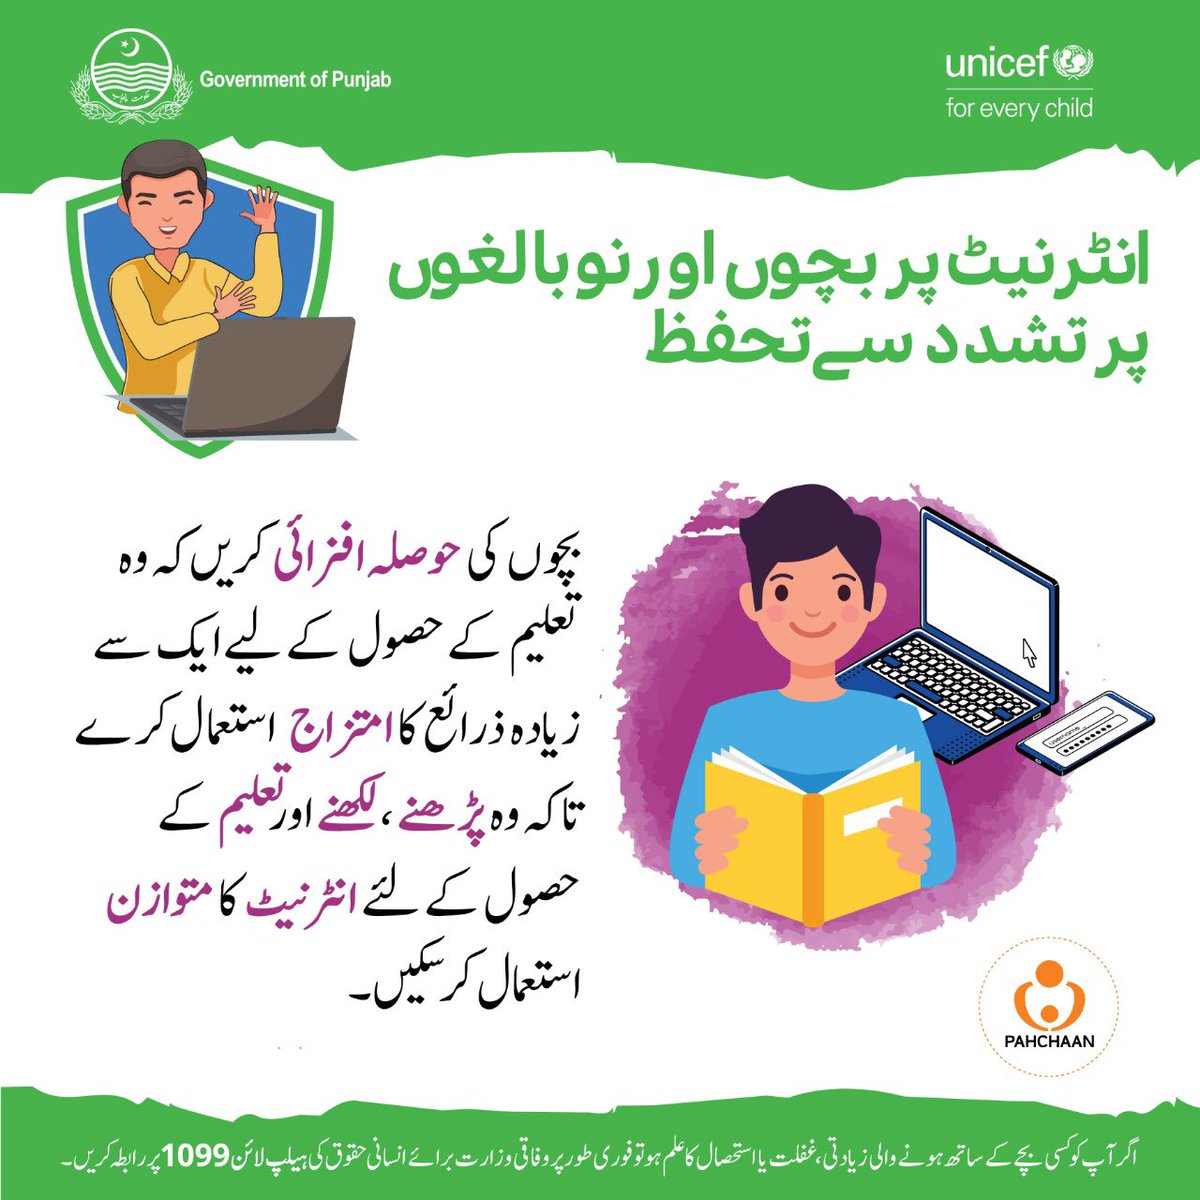 For every child, everywhere! 🌍 

#unicef #pahchaan #foreverychild #onlinesafetytips #violenceagainstchildren #goodparenting #covid19 #followsops